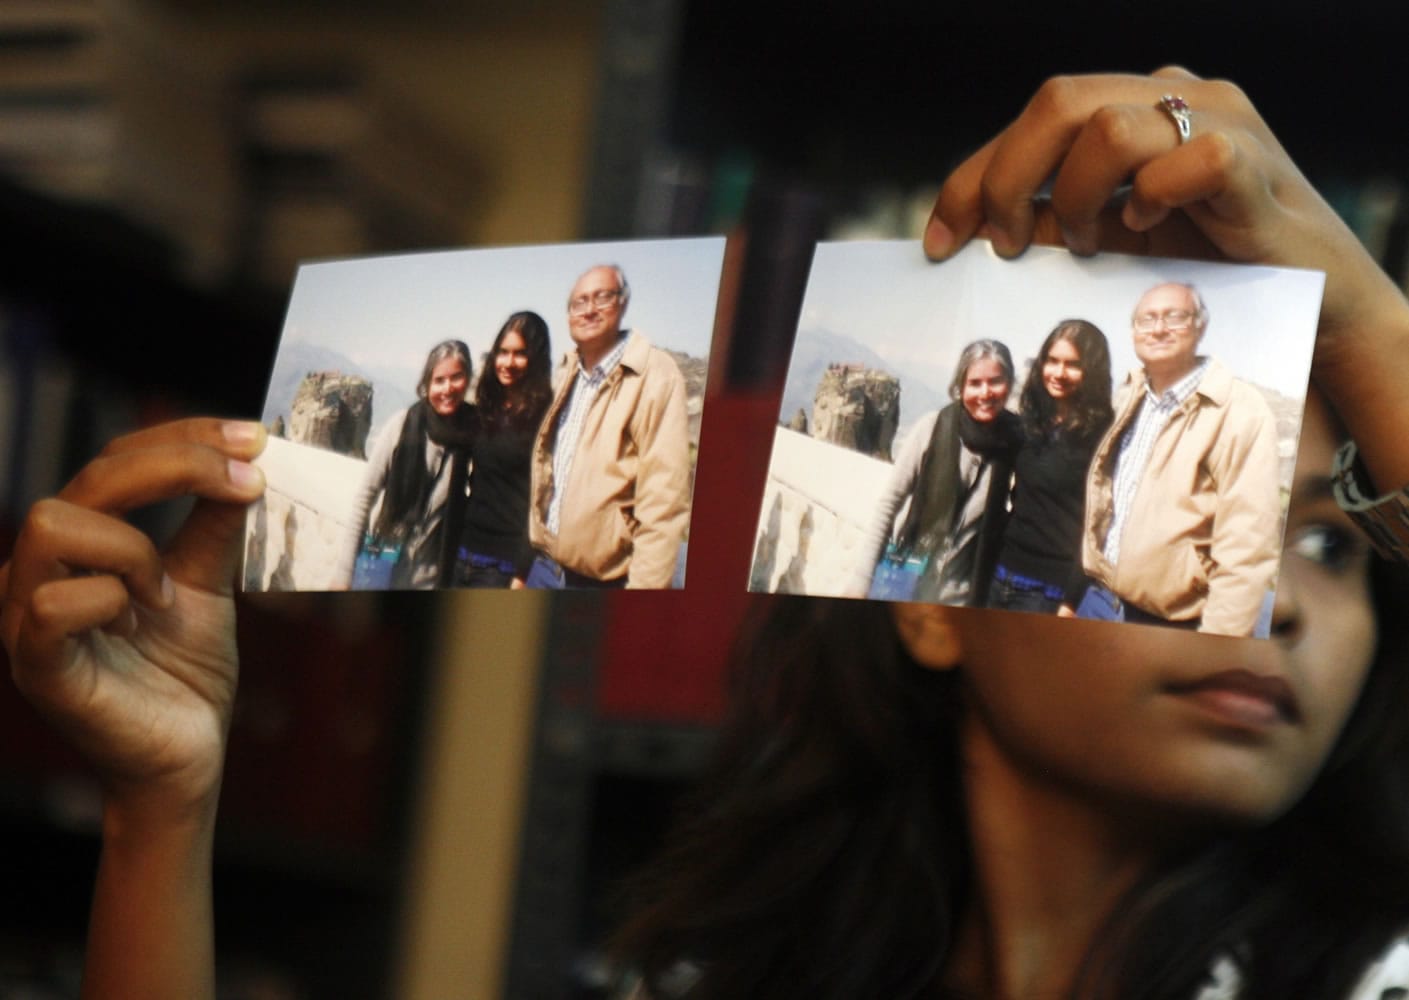 Photographs showing one of the passengers of the missing Malaysian Airlines aircraft Chandrika Sharma, left, her husband Narendran and daughter Meghna, are displayed during a press conference in Chennai, India, on Wednesday.